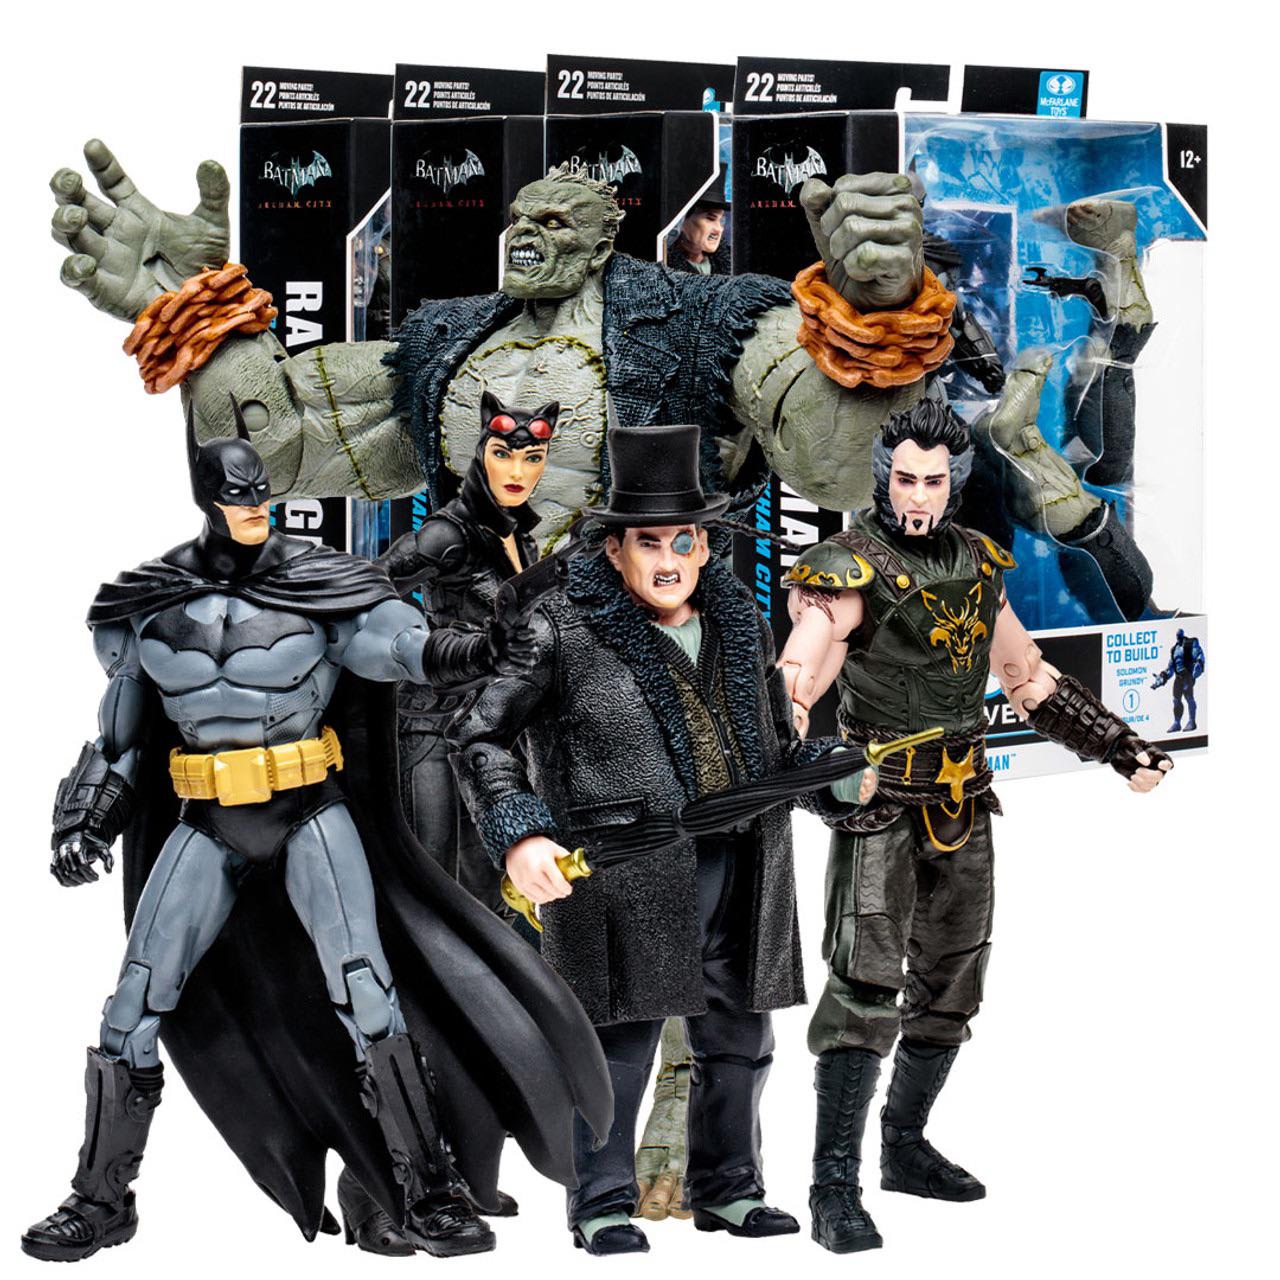 If you’re interested, McFarlane Toys is releasing an Arkham City Wave with a Solomon Grundy Build-A-Figure. Thought they looked cool and wanted to share with you